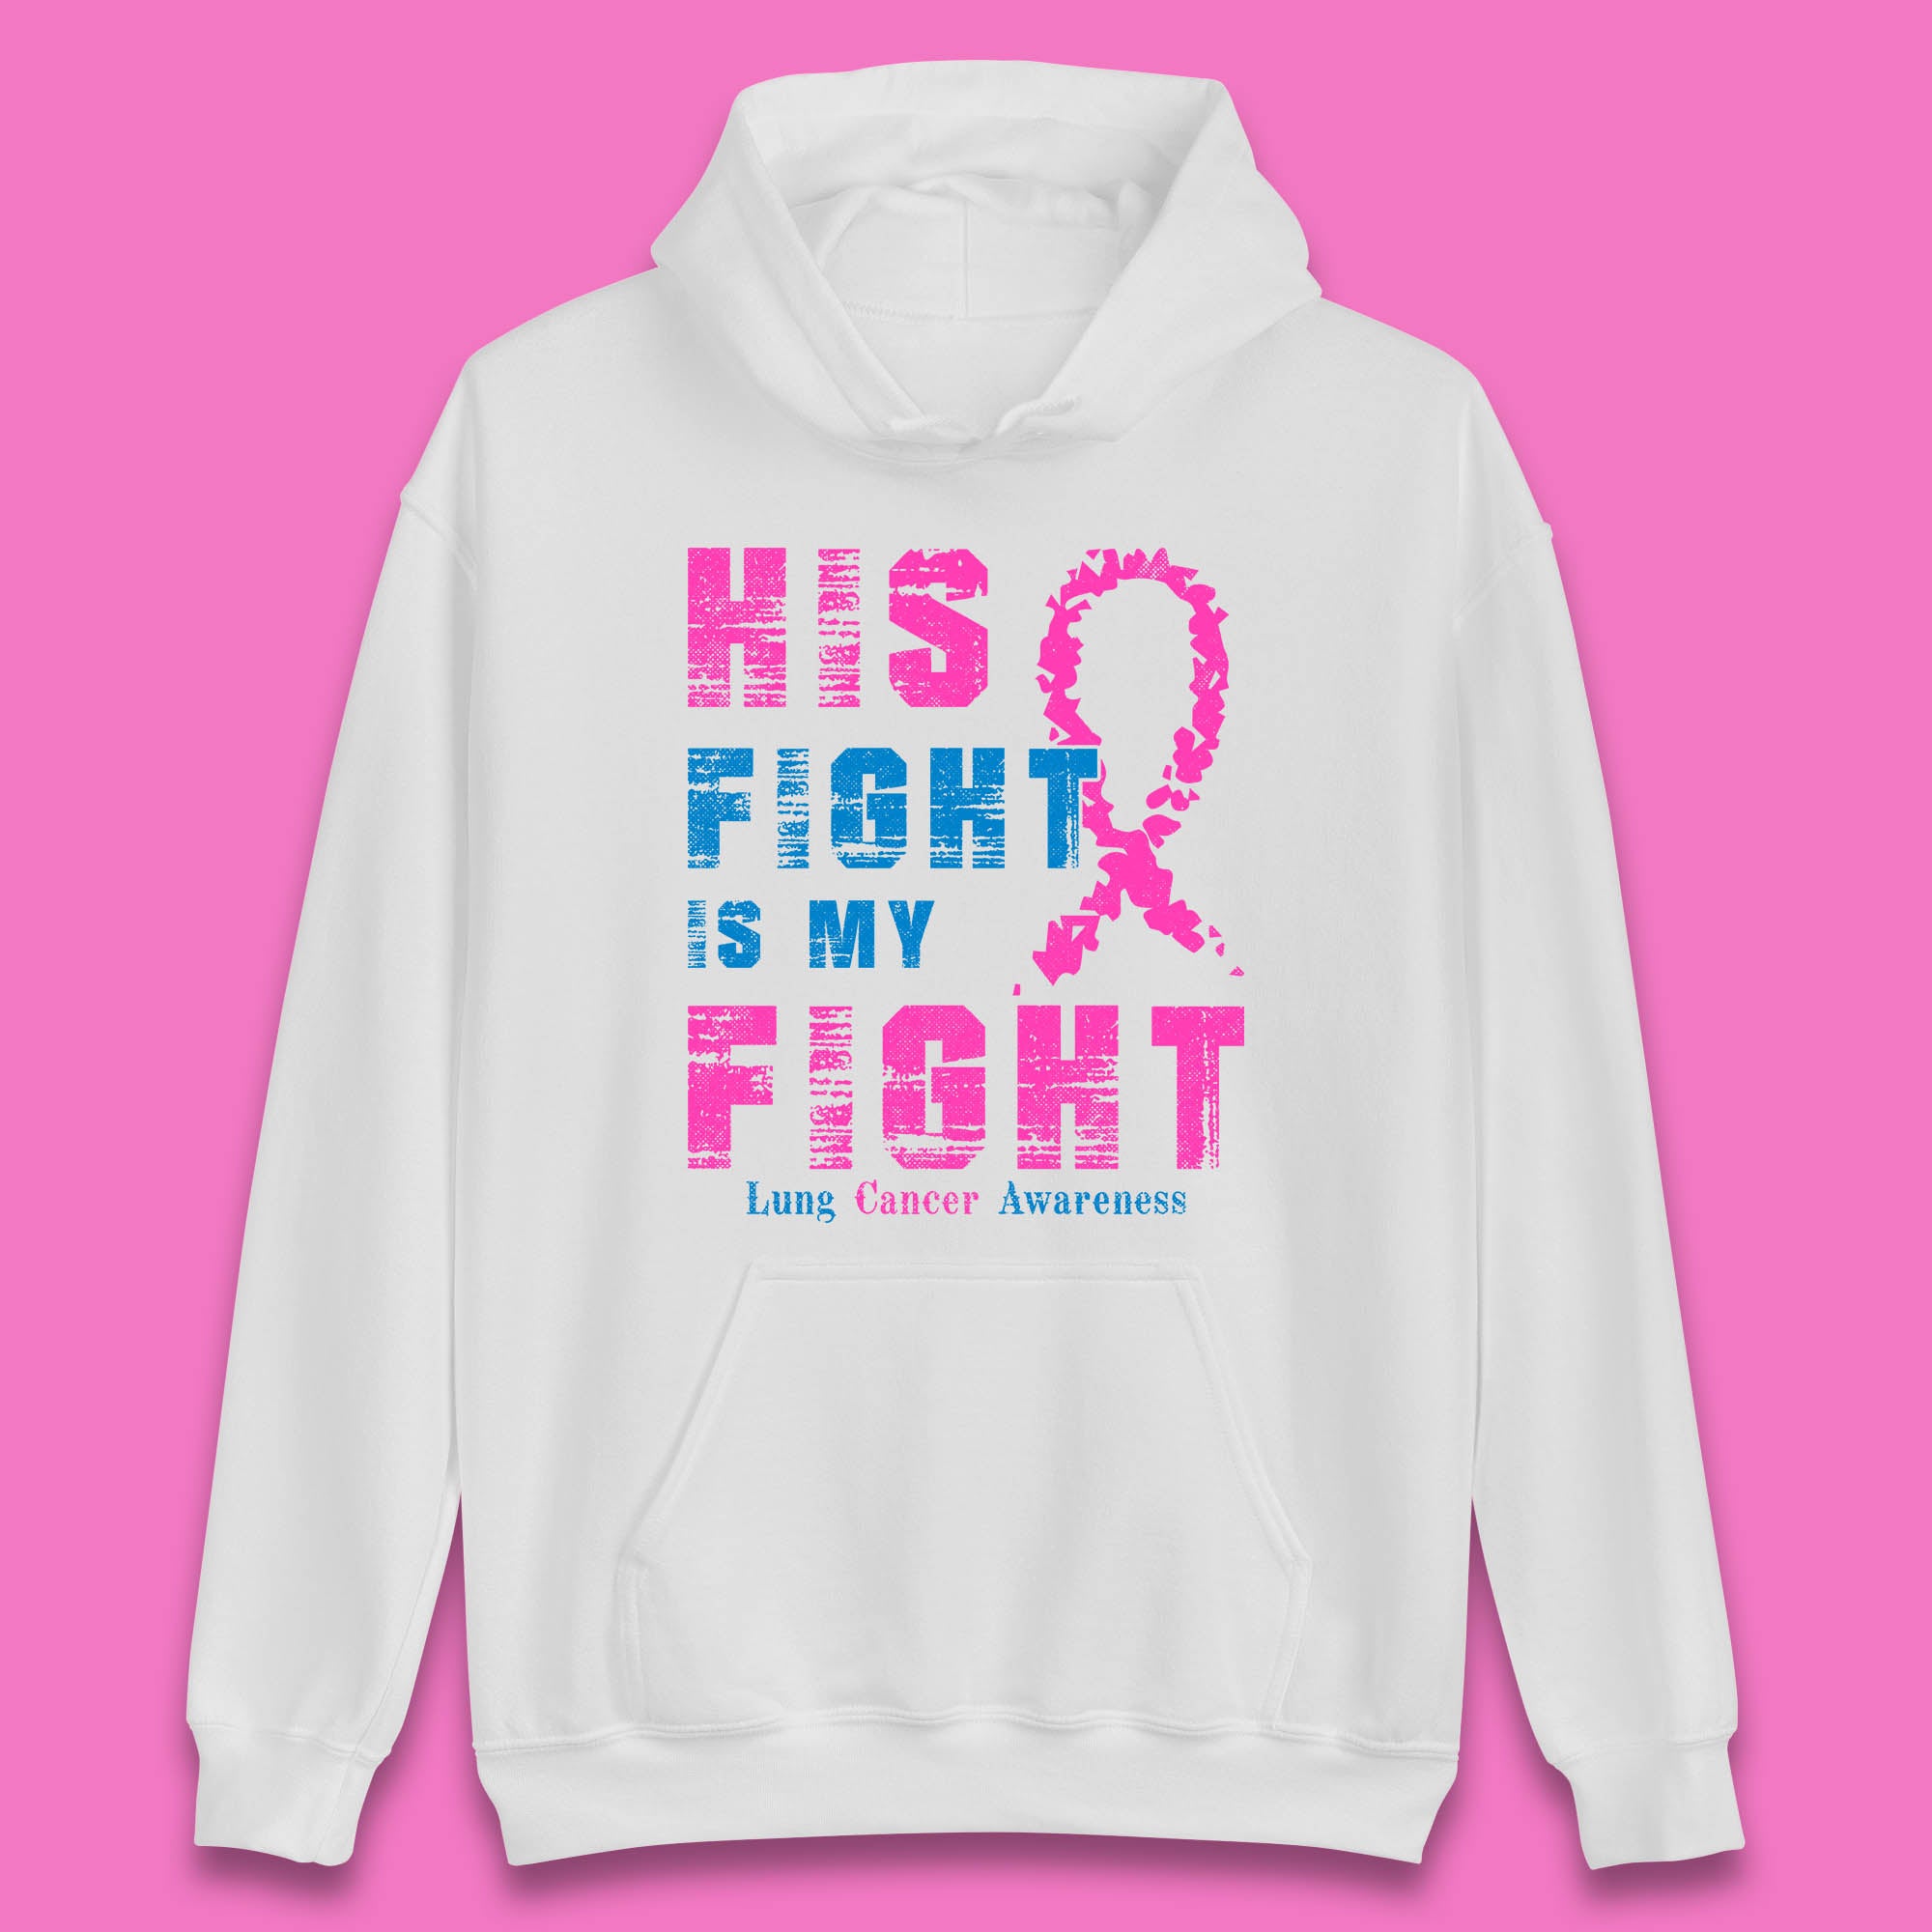 His Fight Is My Fight Lung Cancer Awareness Warrior Fighter Cancer Support Unisex Hoodie